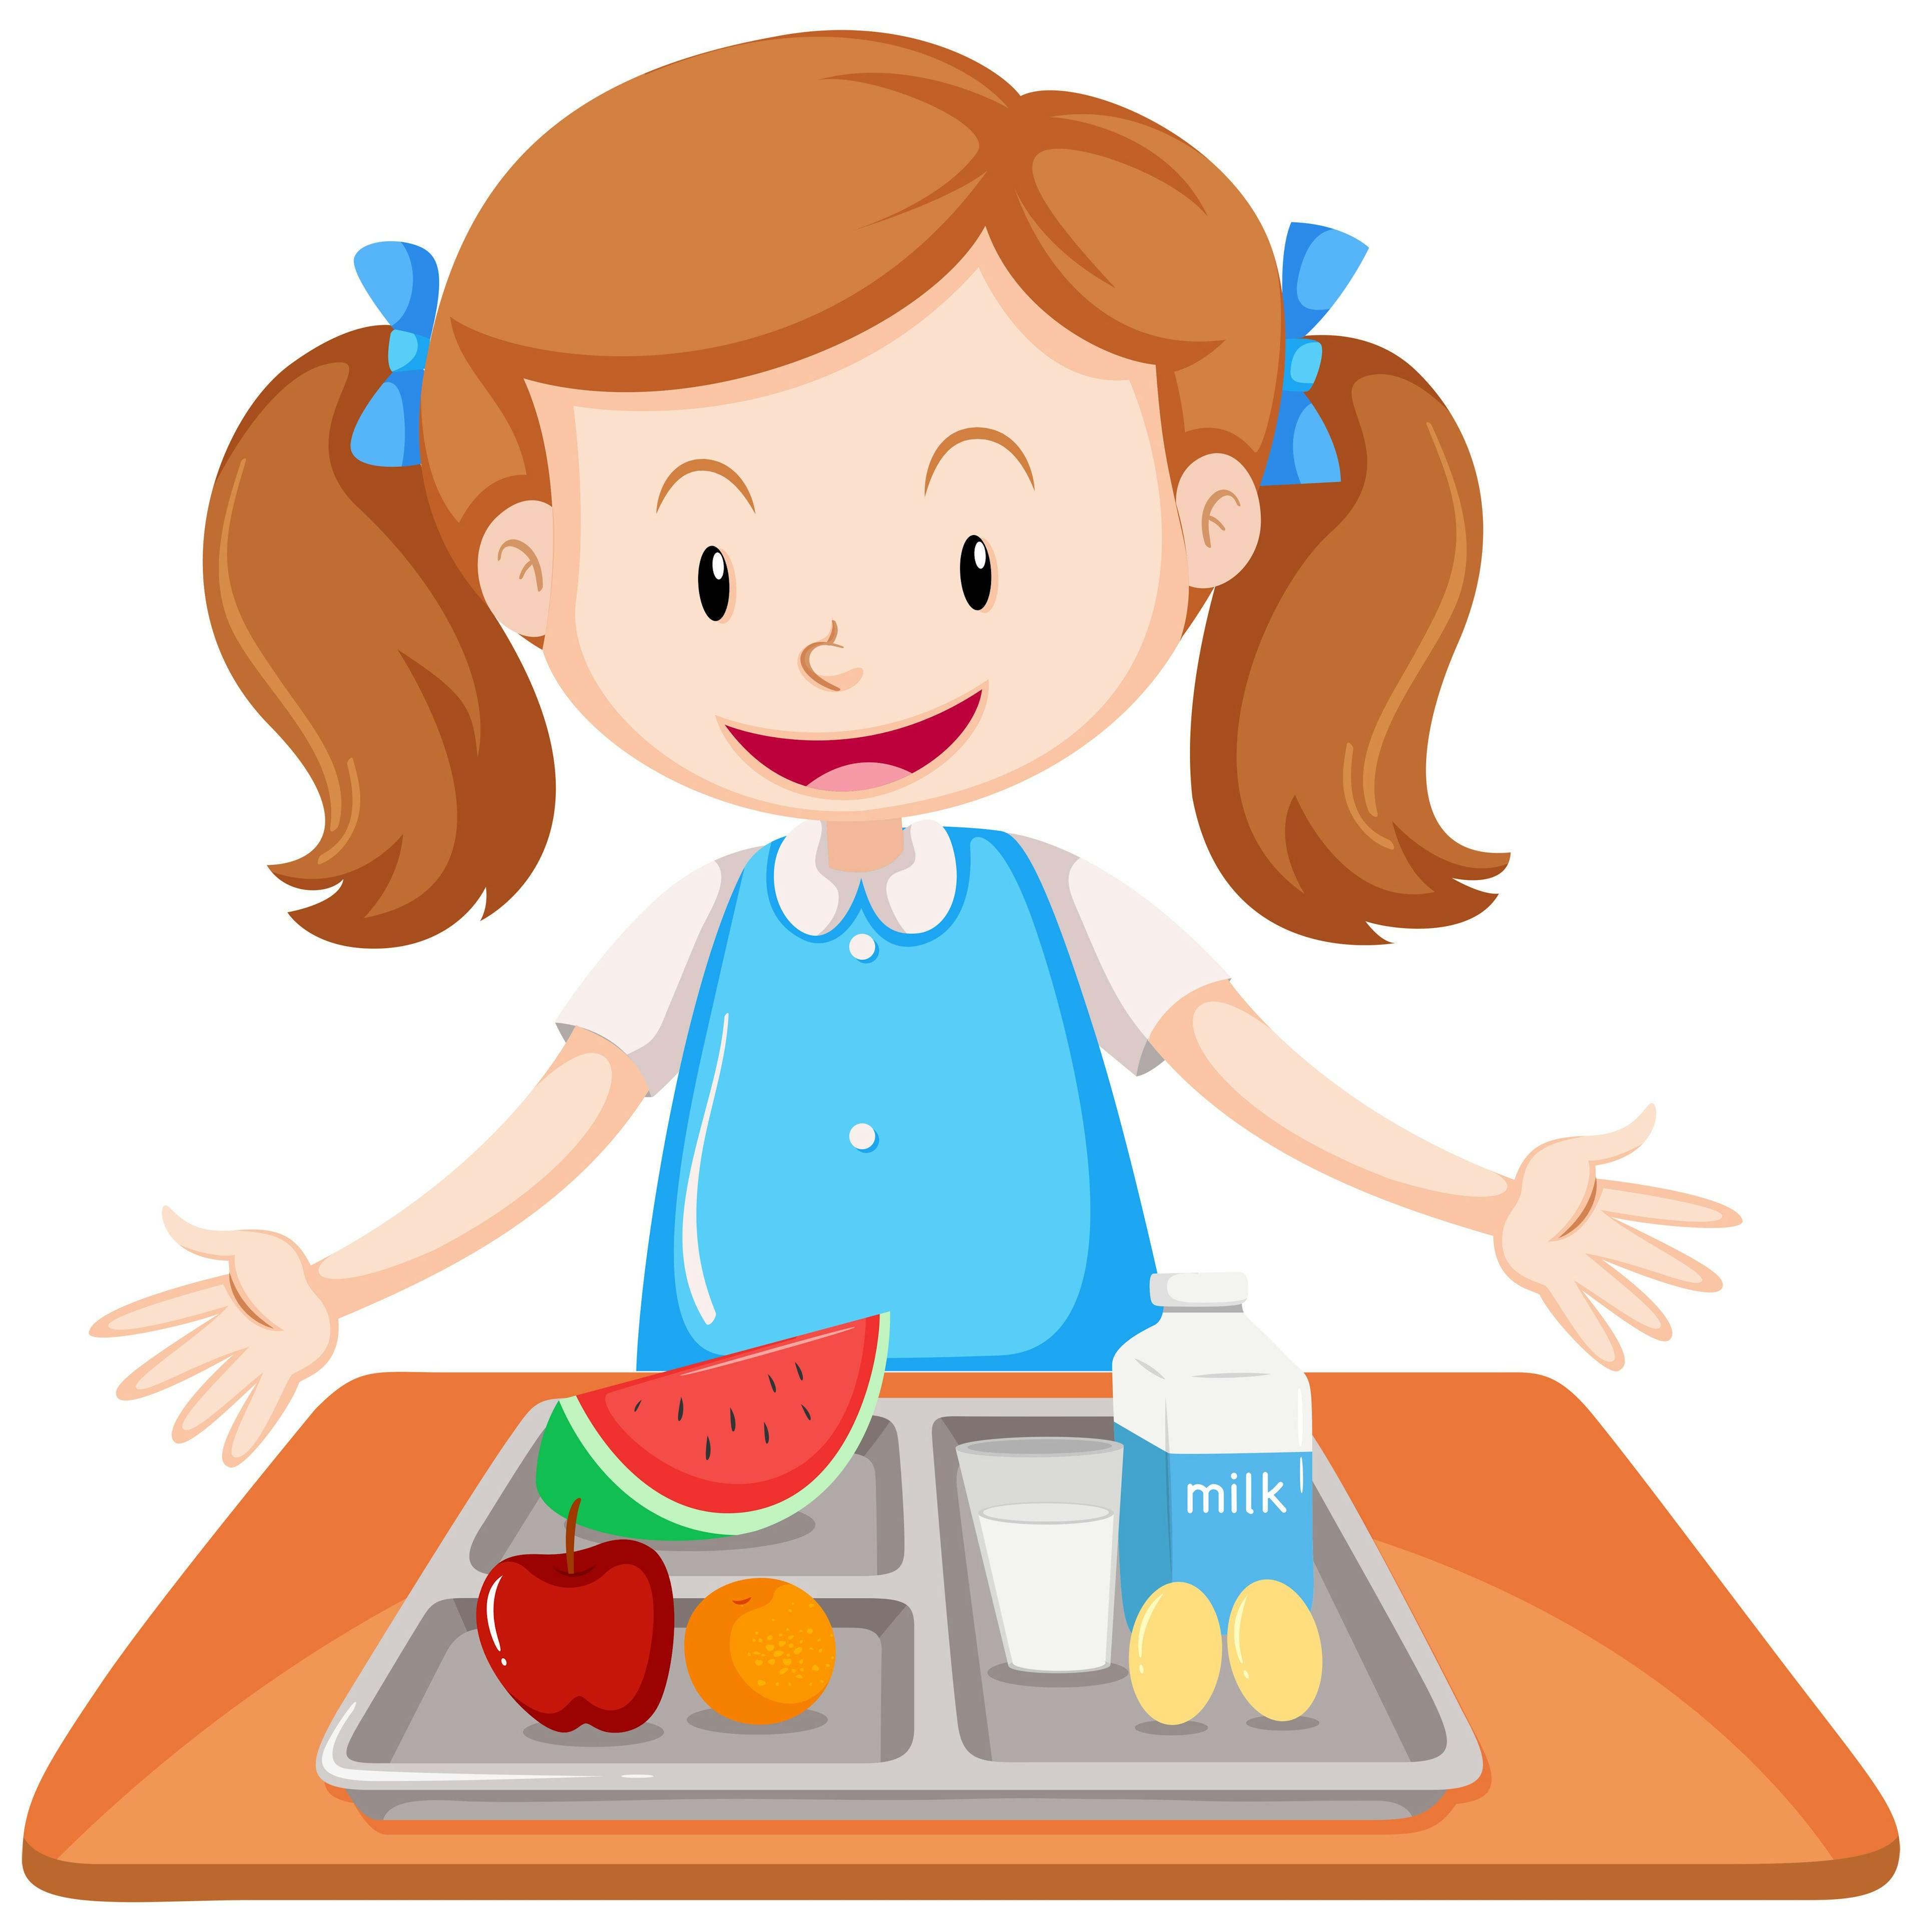 Making meal time fuss-free for children